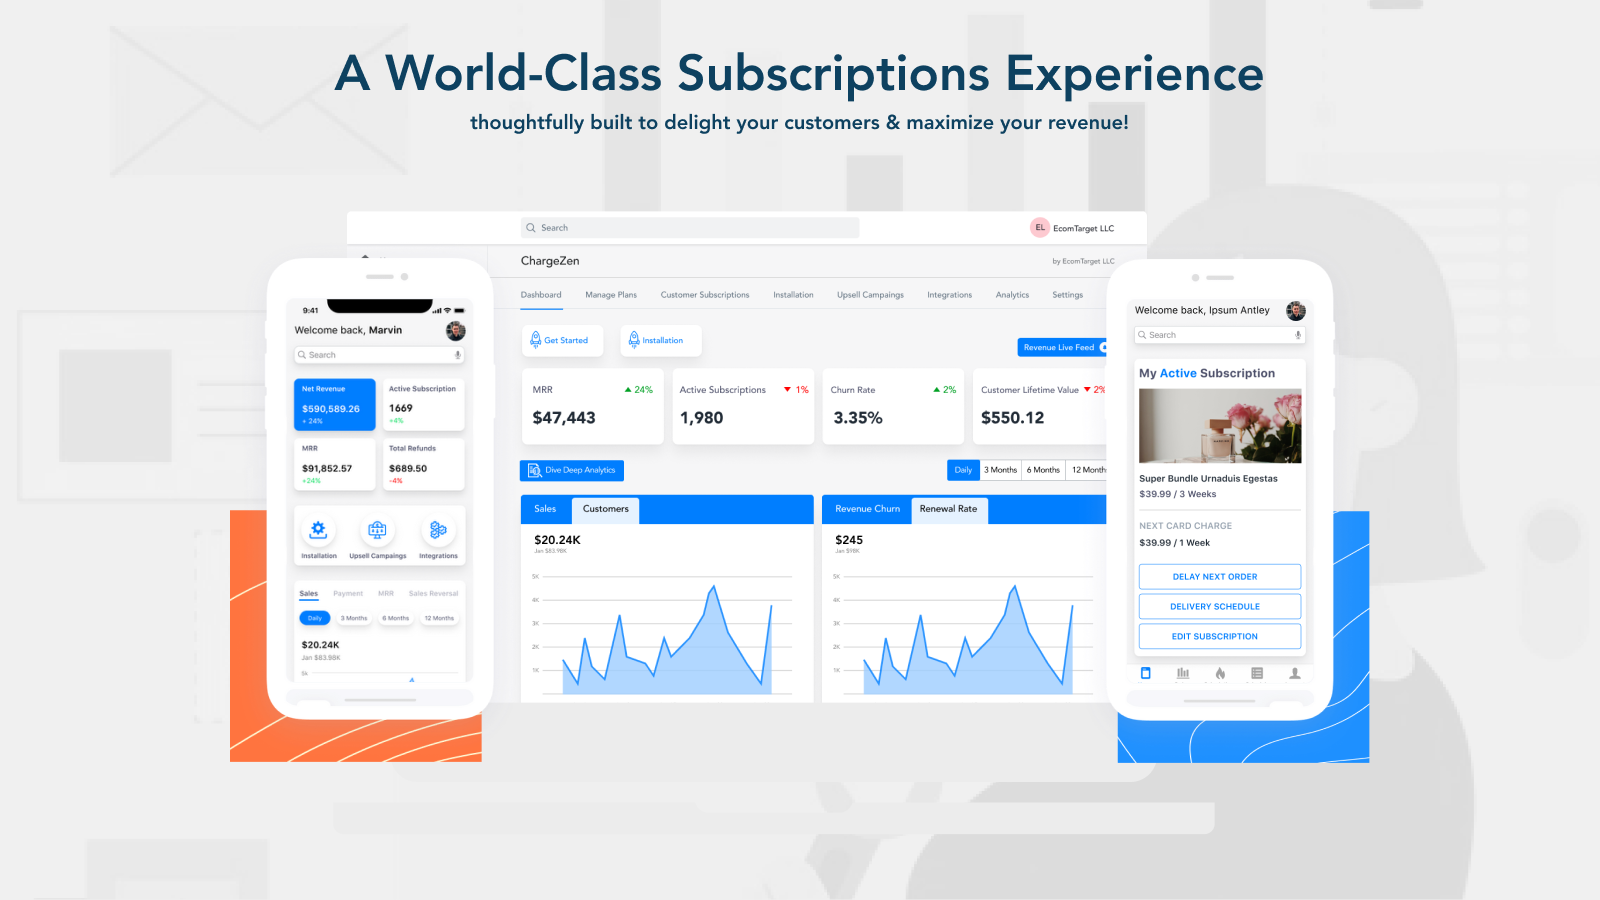 It's built to provide a world-class subscription experience.